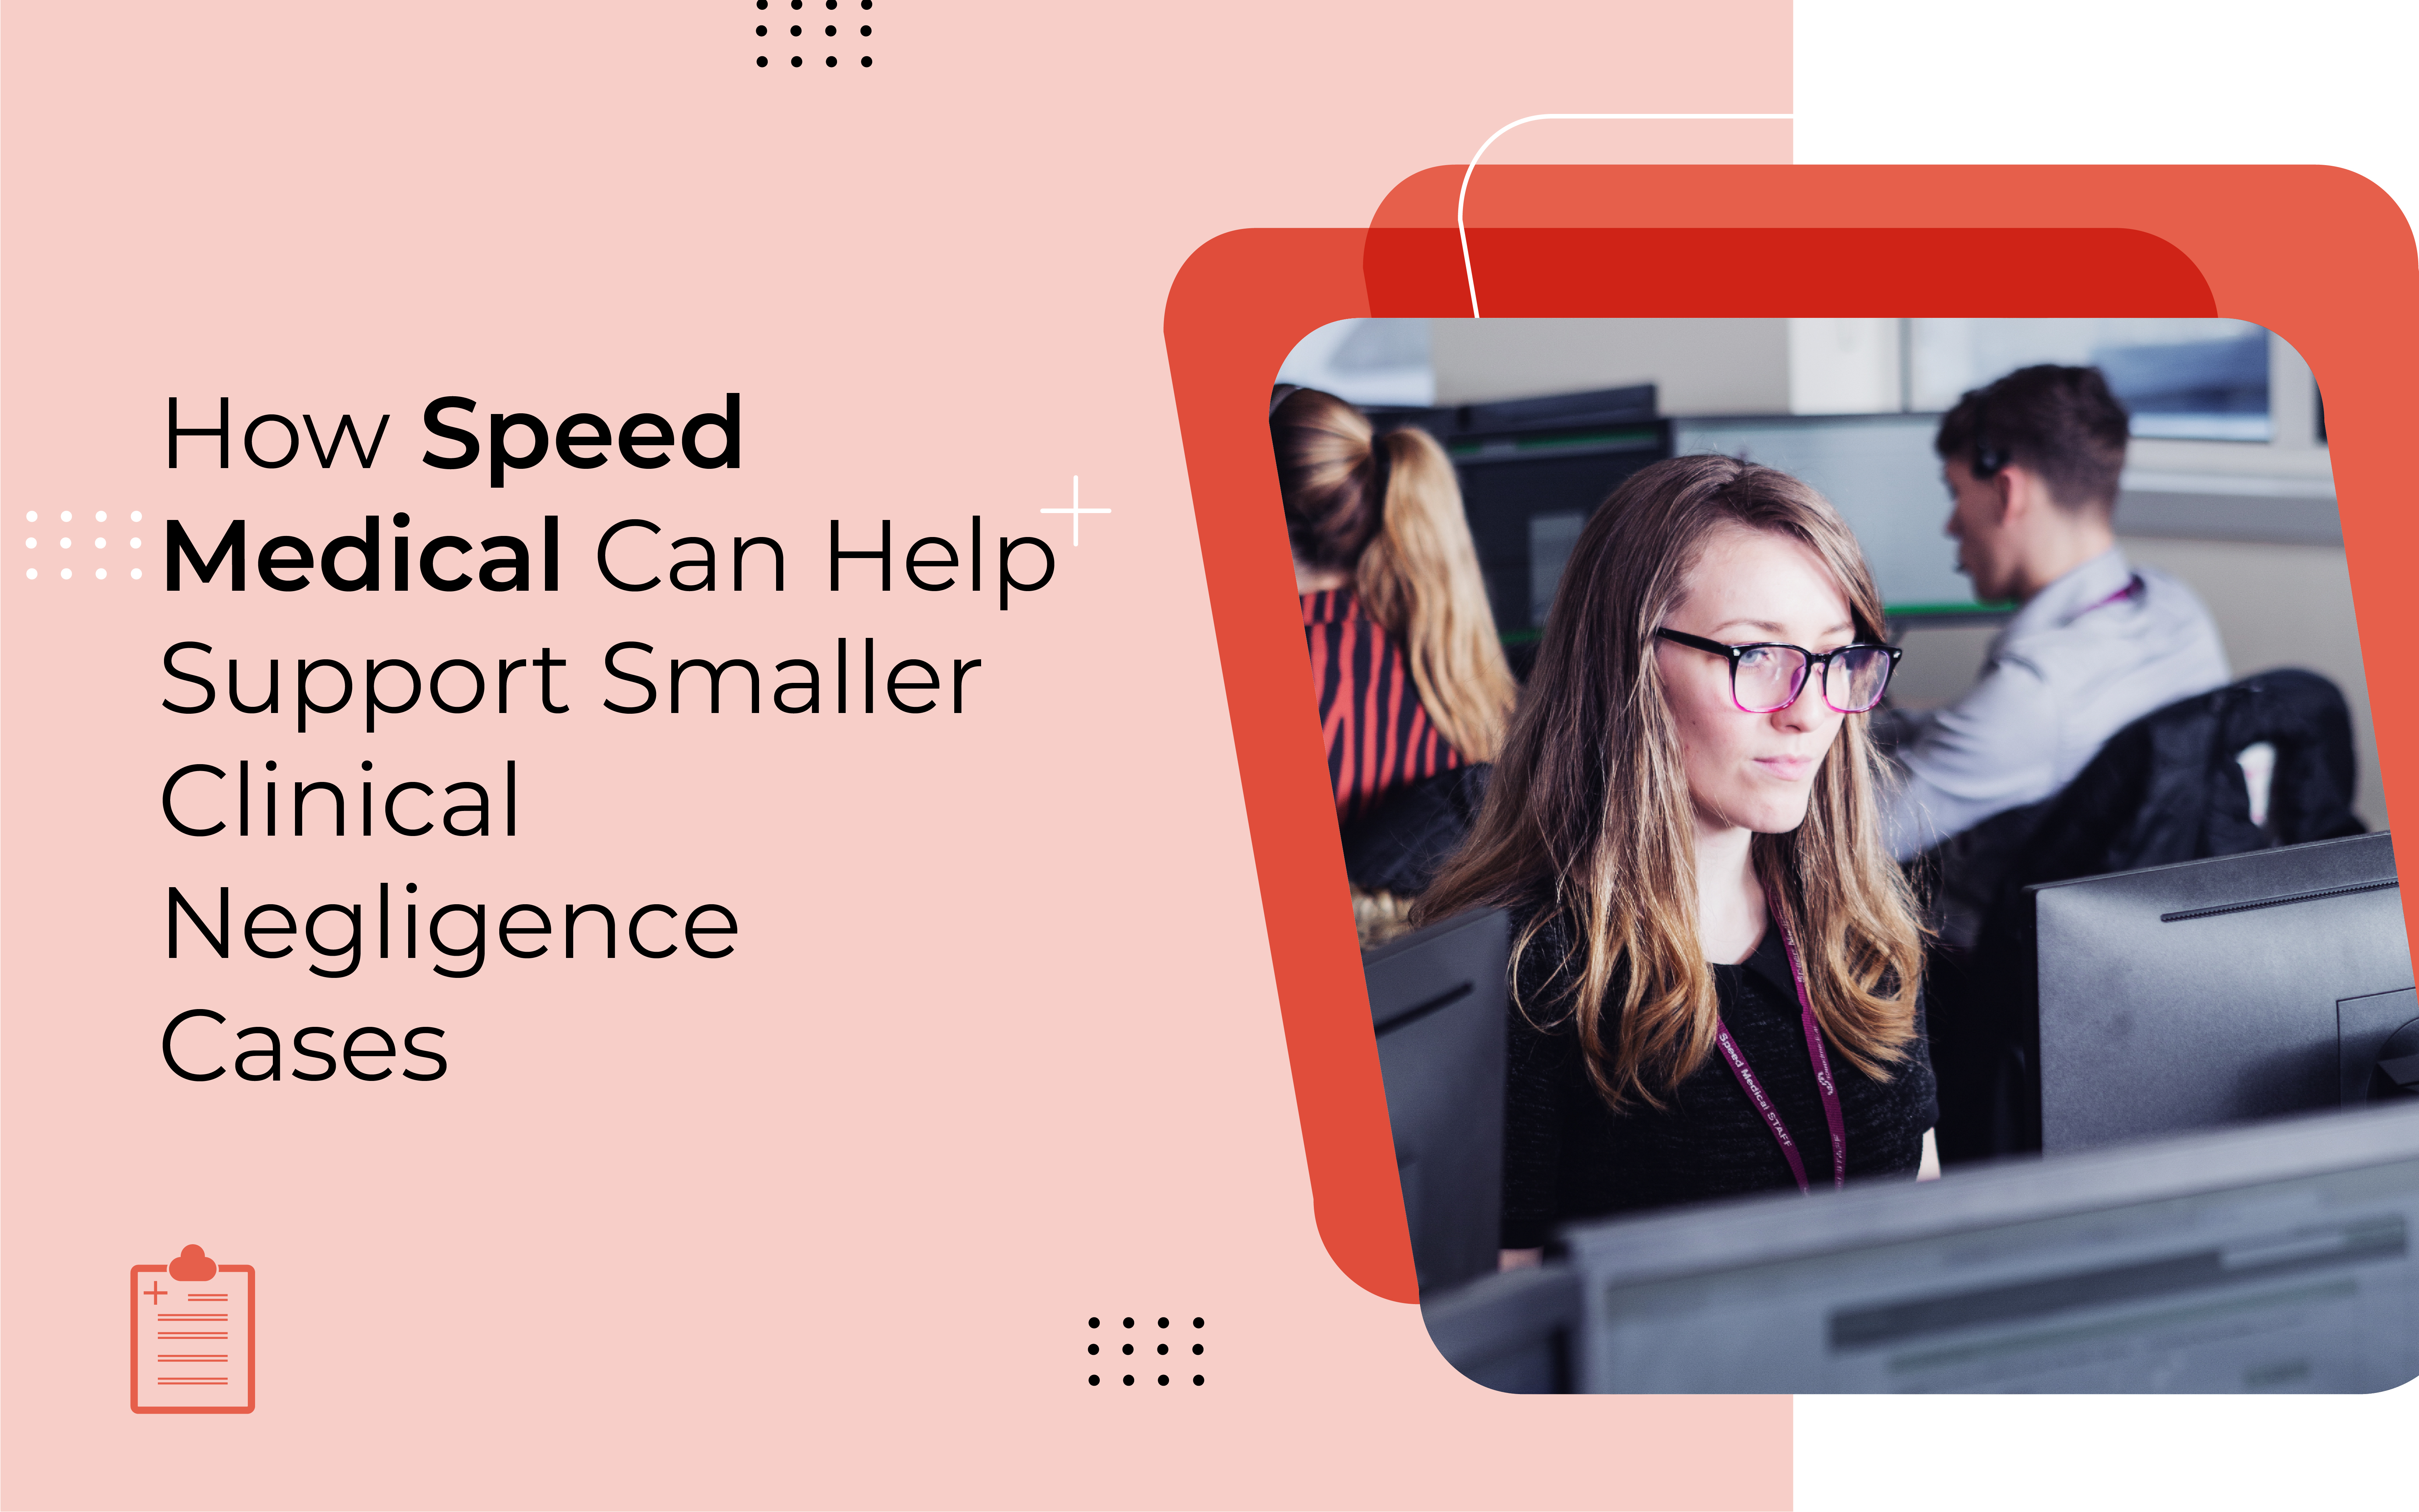 How Speed Medical Can Help Support Smaller Clinical Negligence Cases